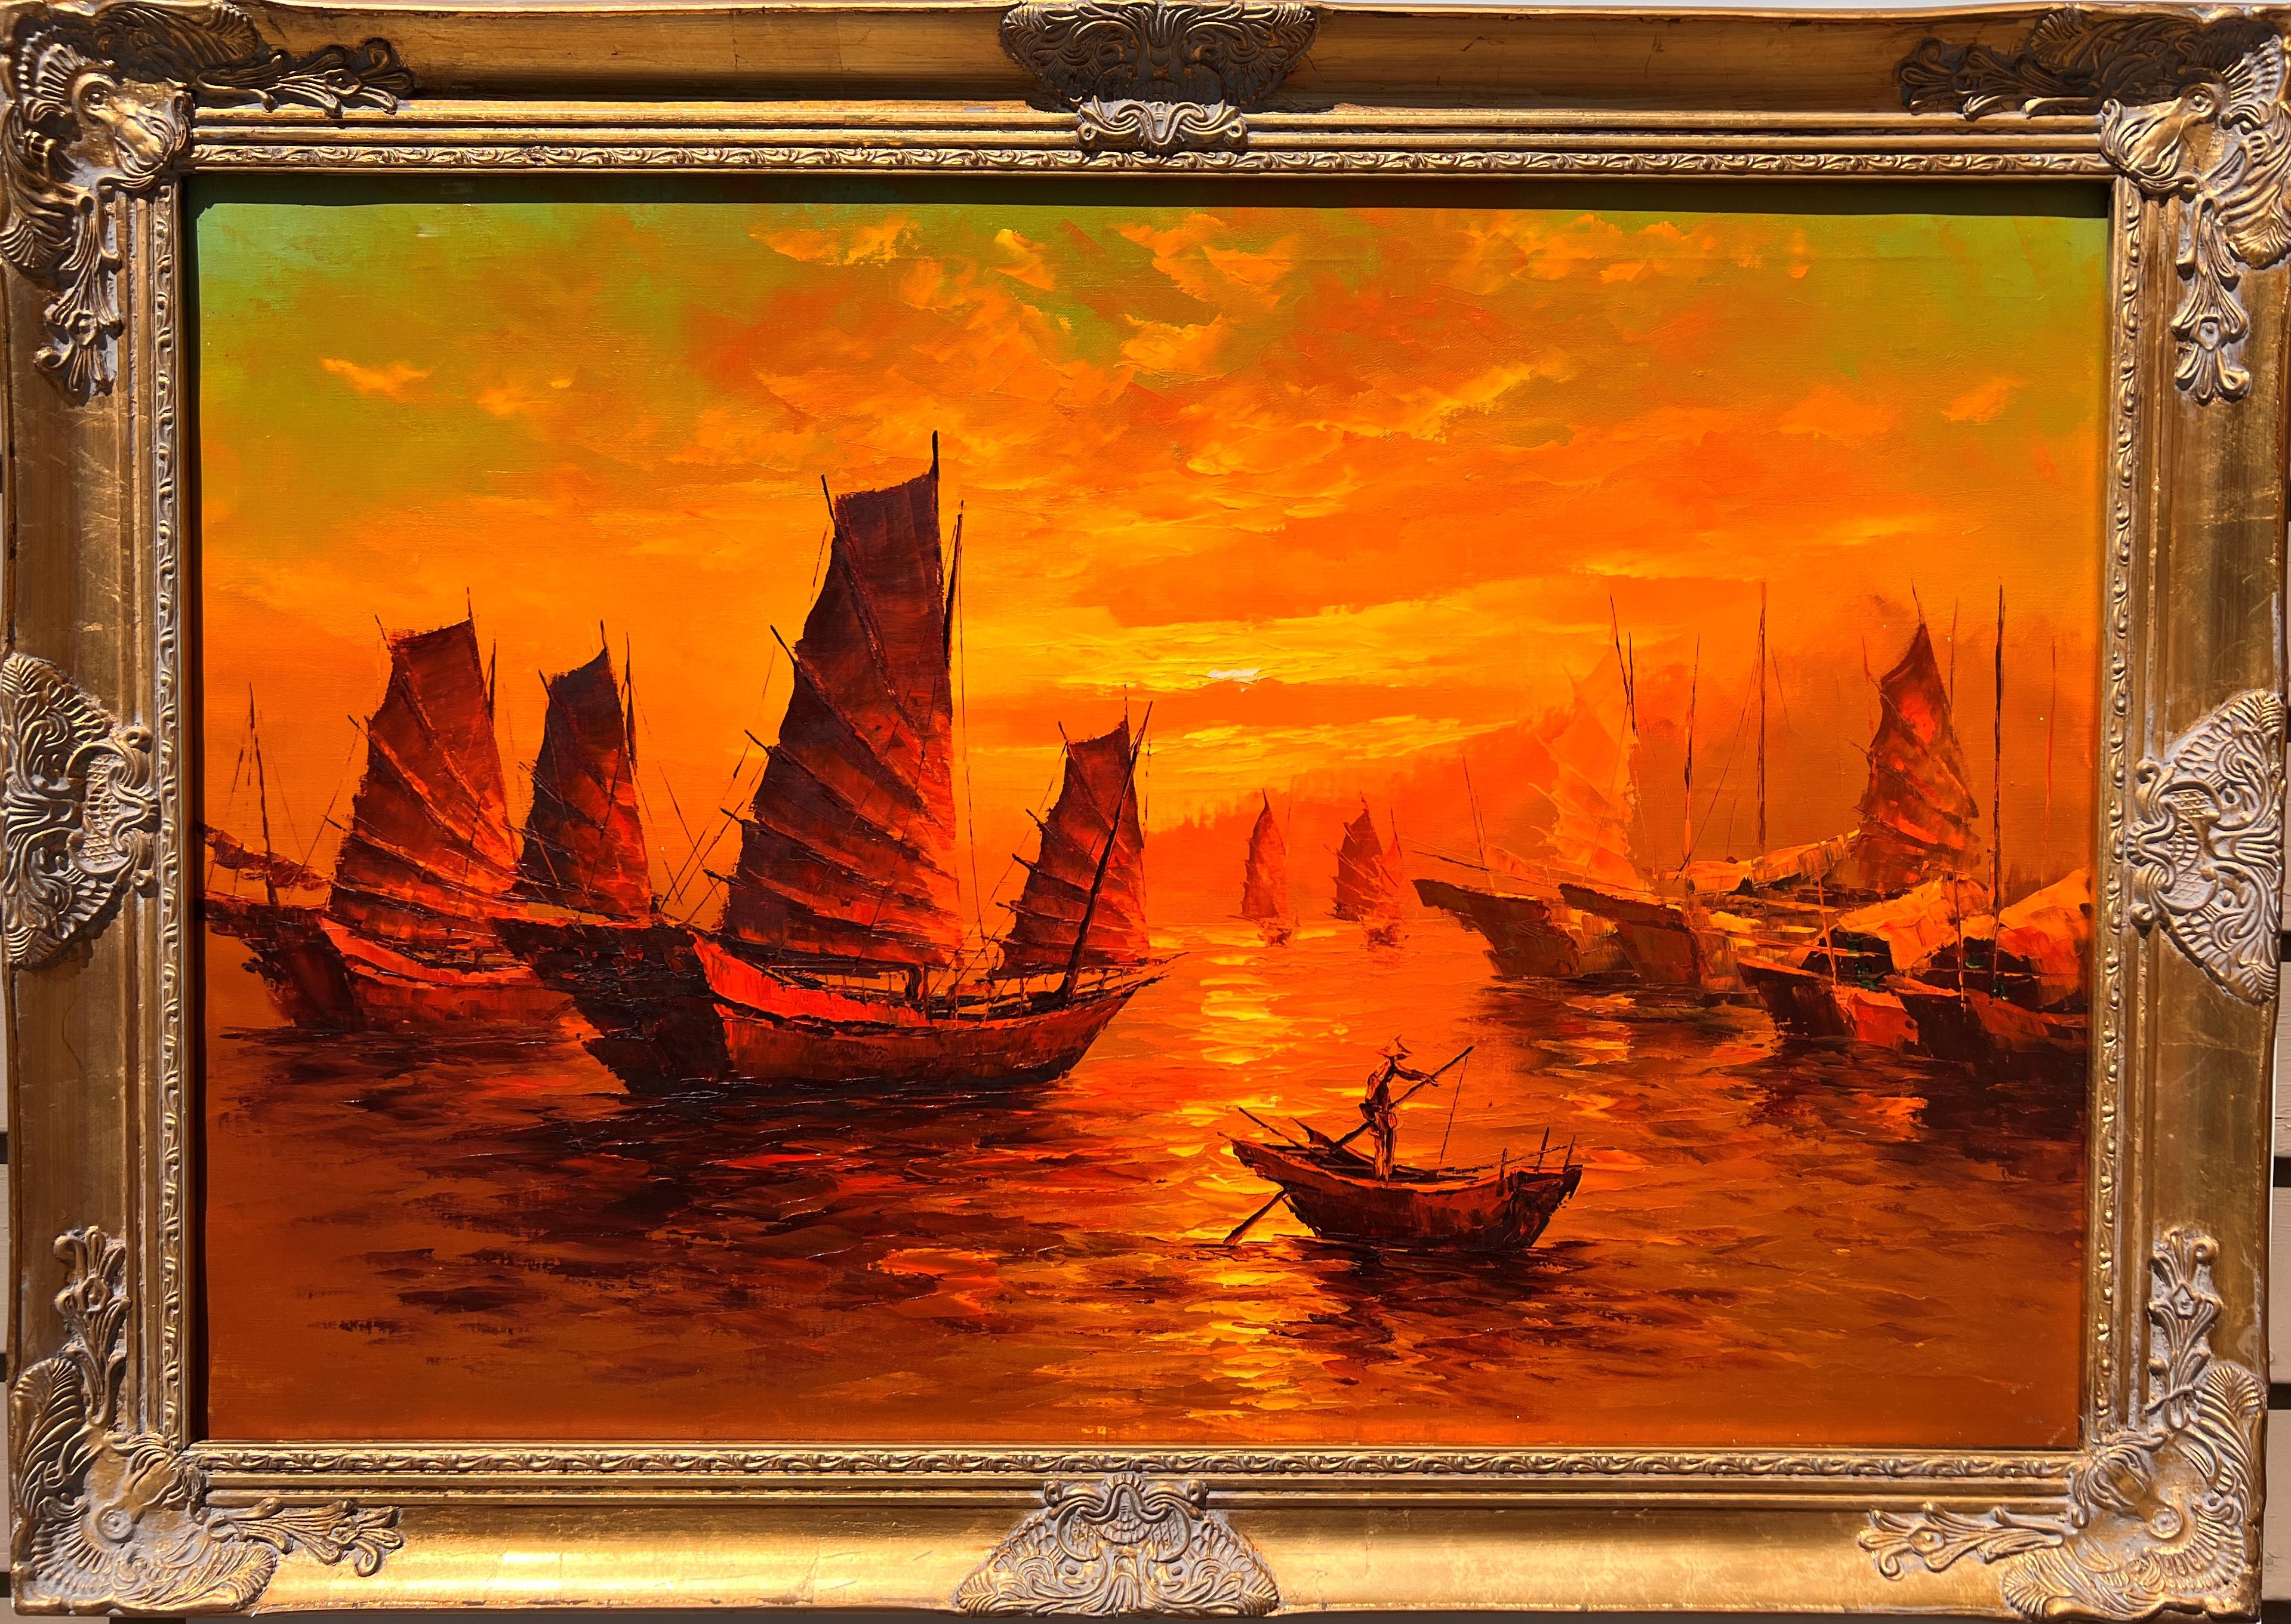 Unknown Landscape Painting - Stunning Large Oil painting on Canvas, Seascape, Sailing Ships at Sunset, Framed